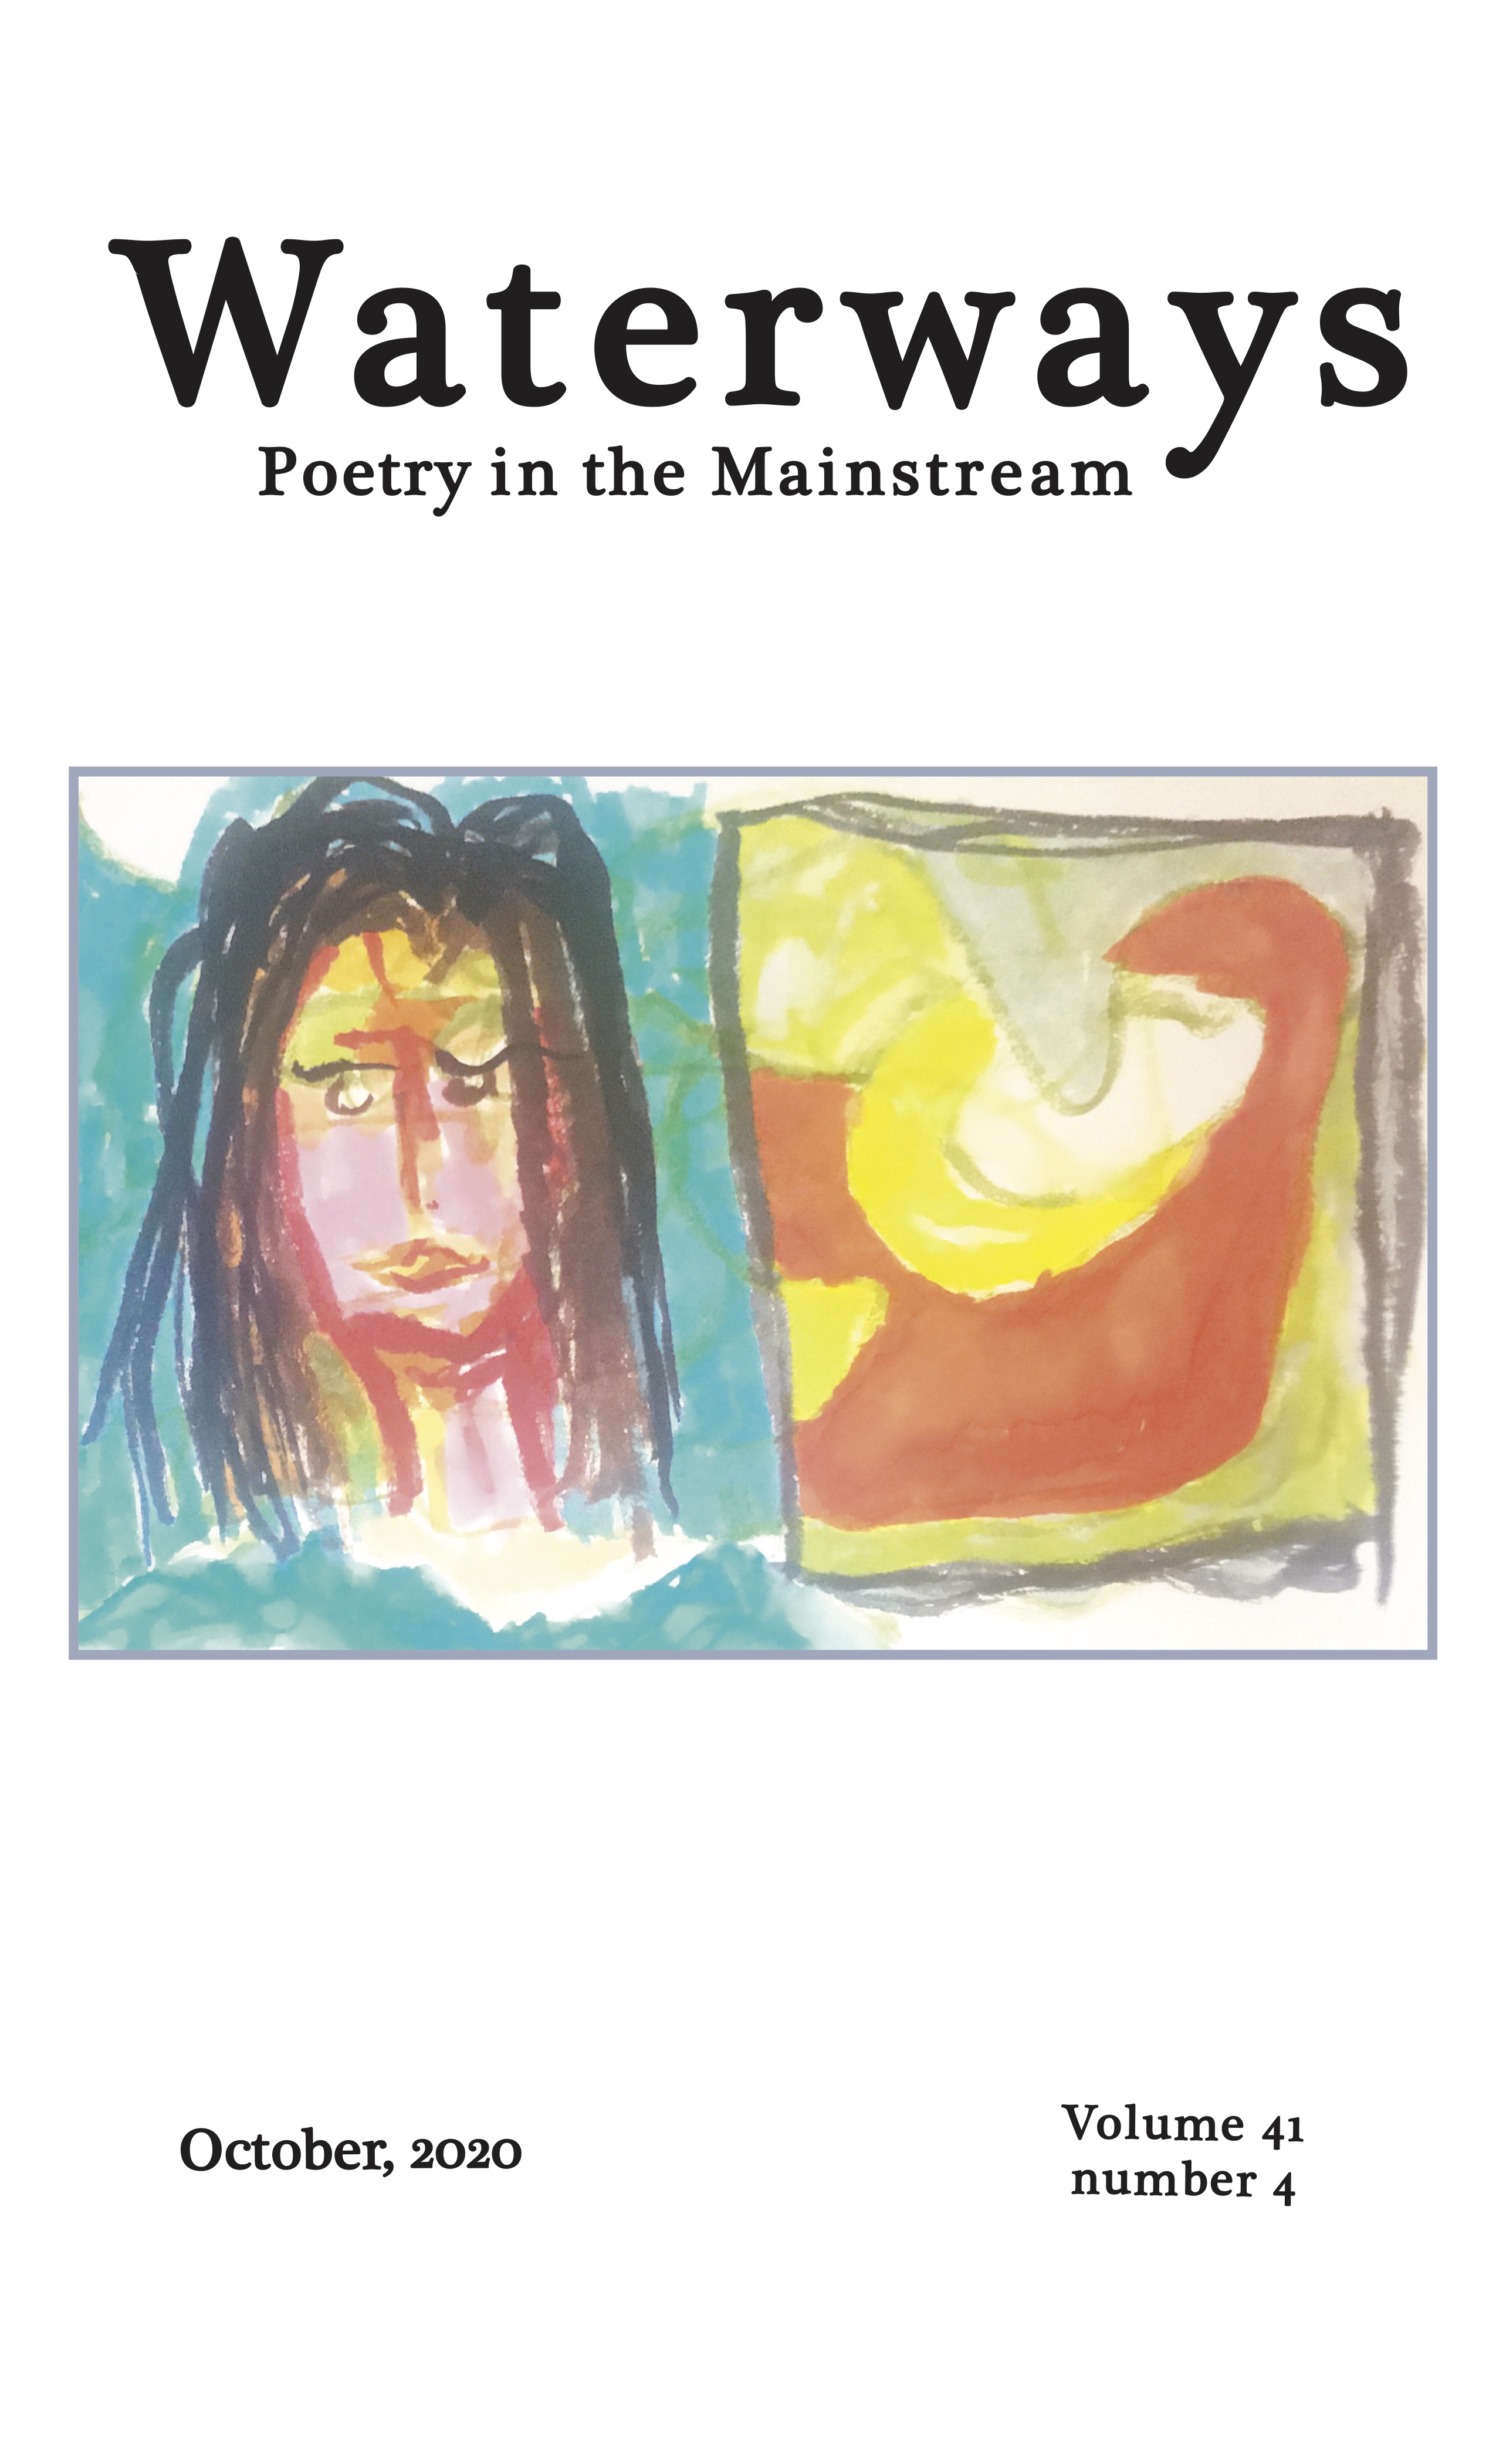 Cover of October 2019 features a watercolor sketch of a woman's face beside an abstract watercolor drawing.